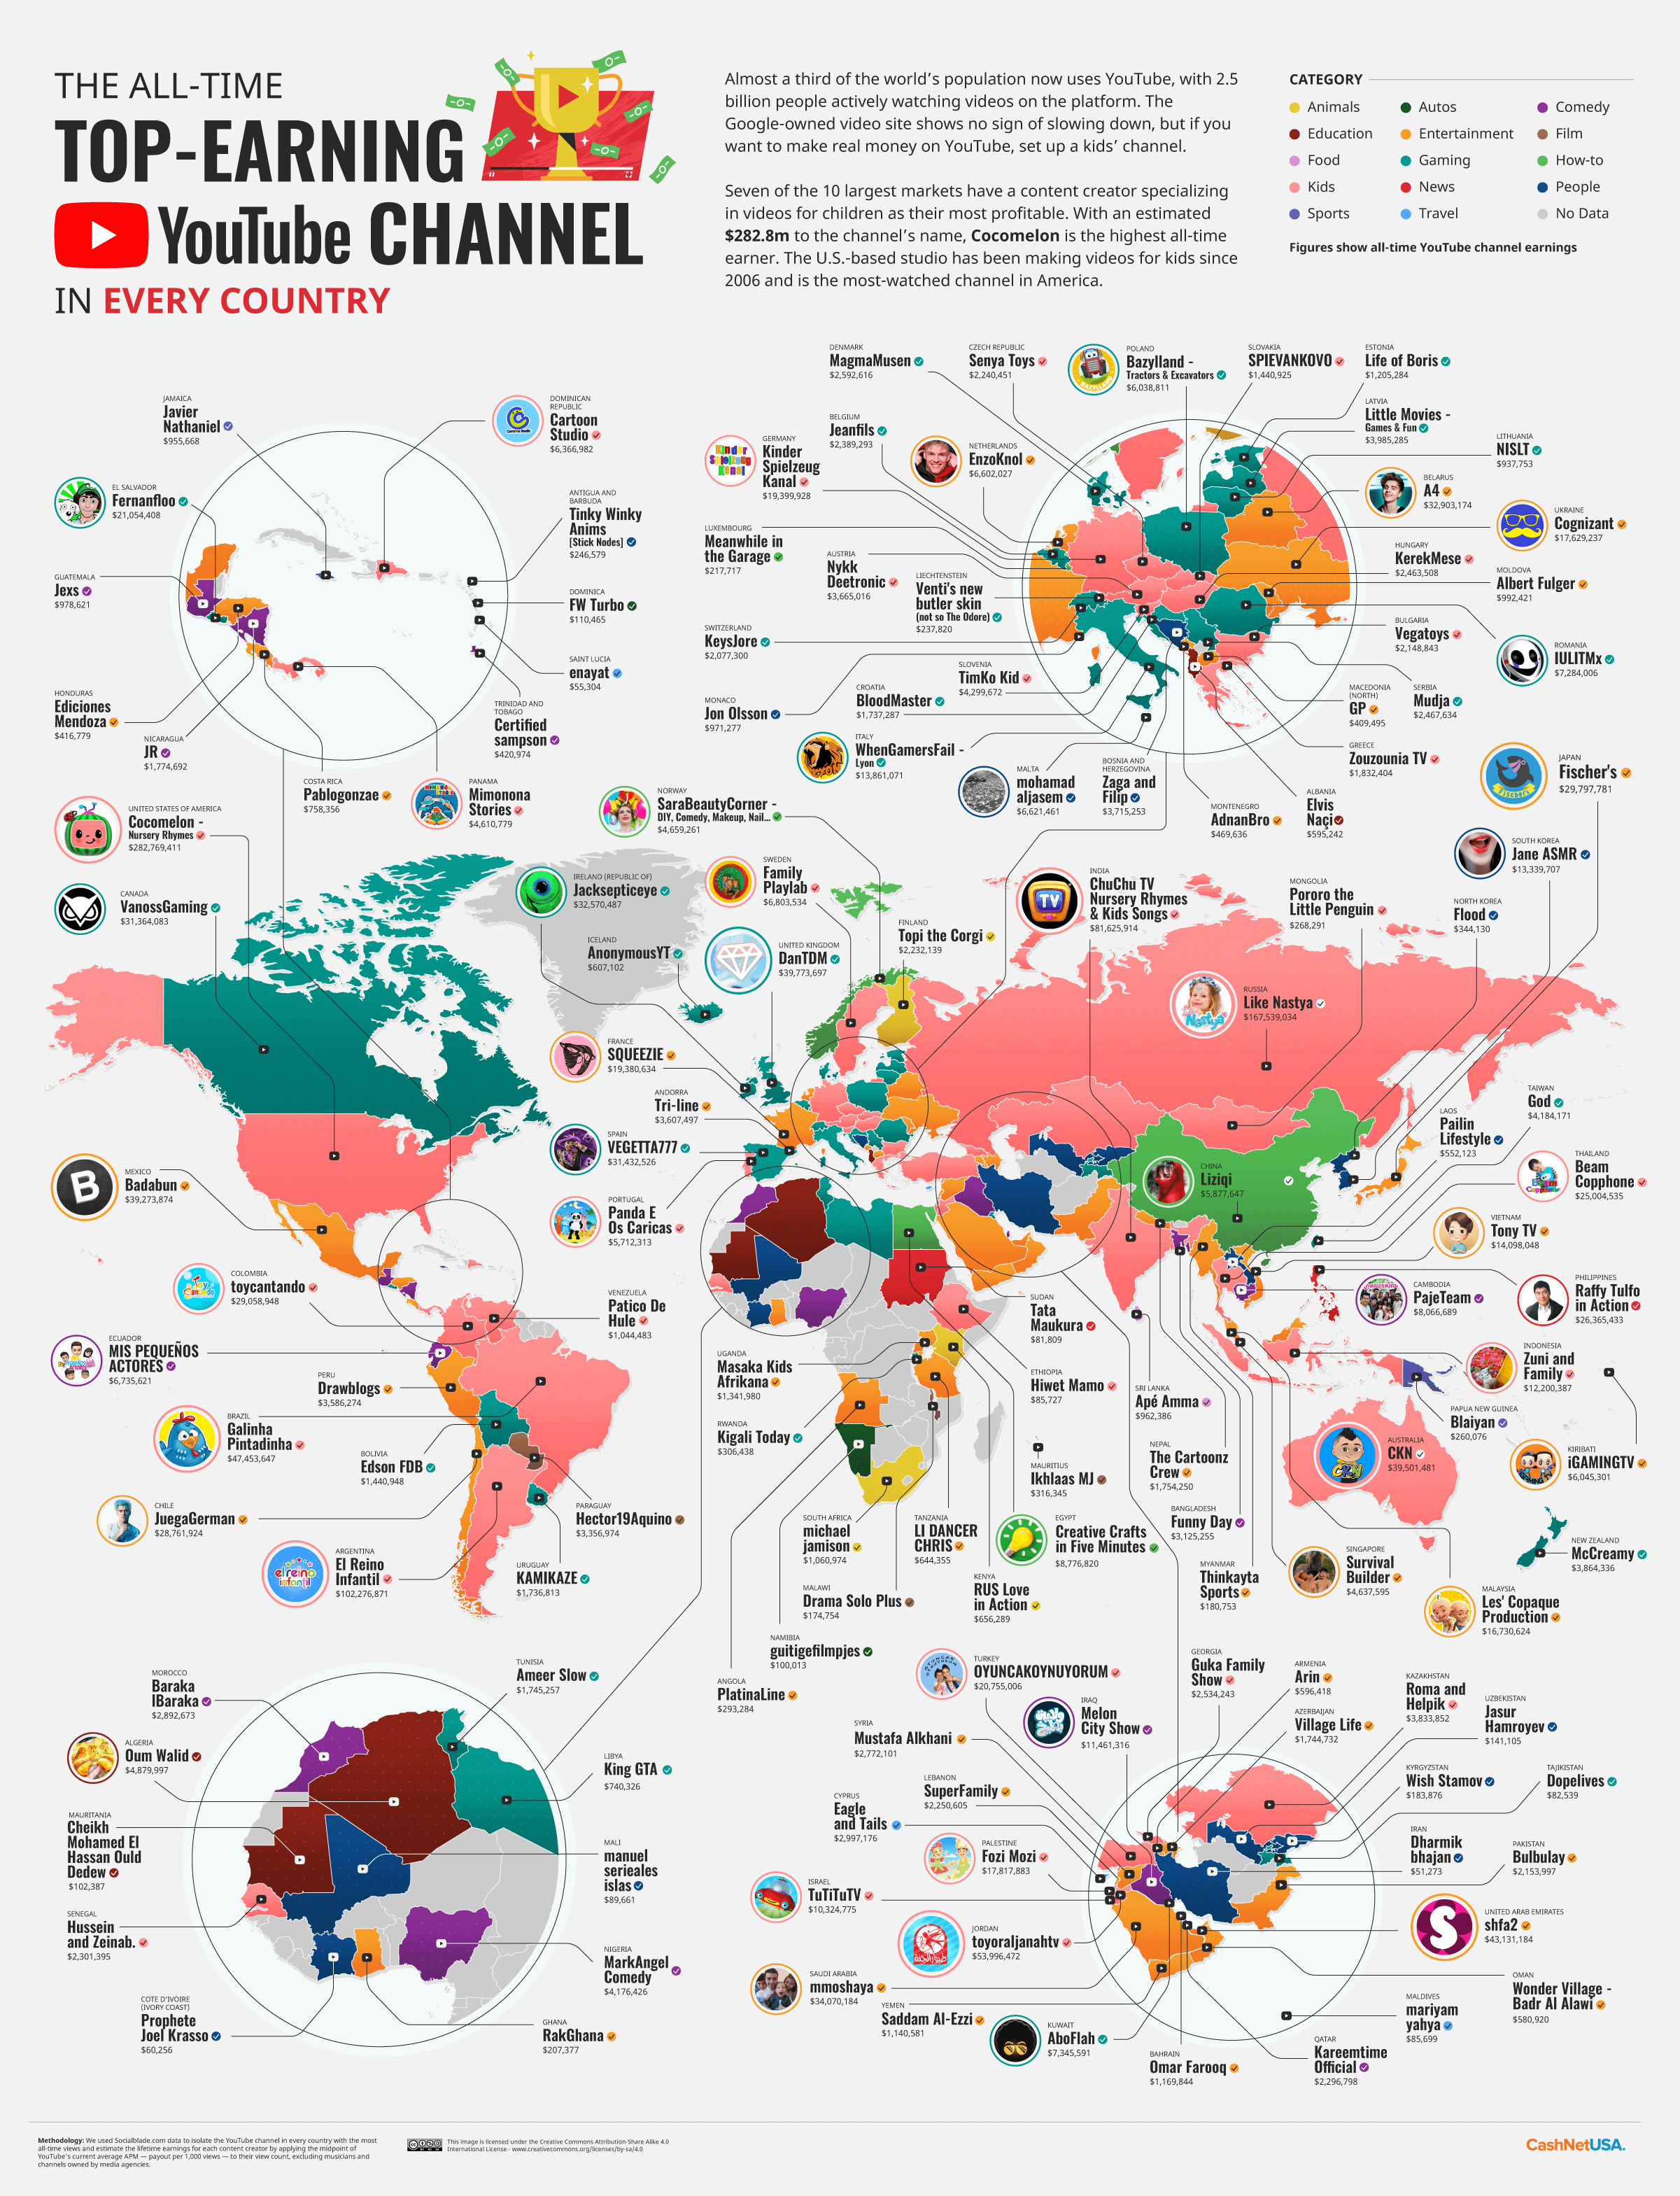 CPM Rates by Country in 2023 [Updated]